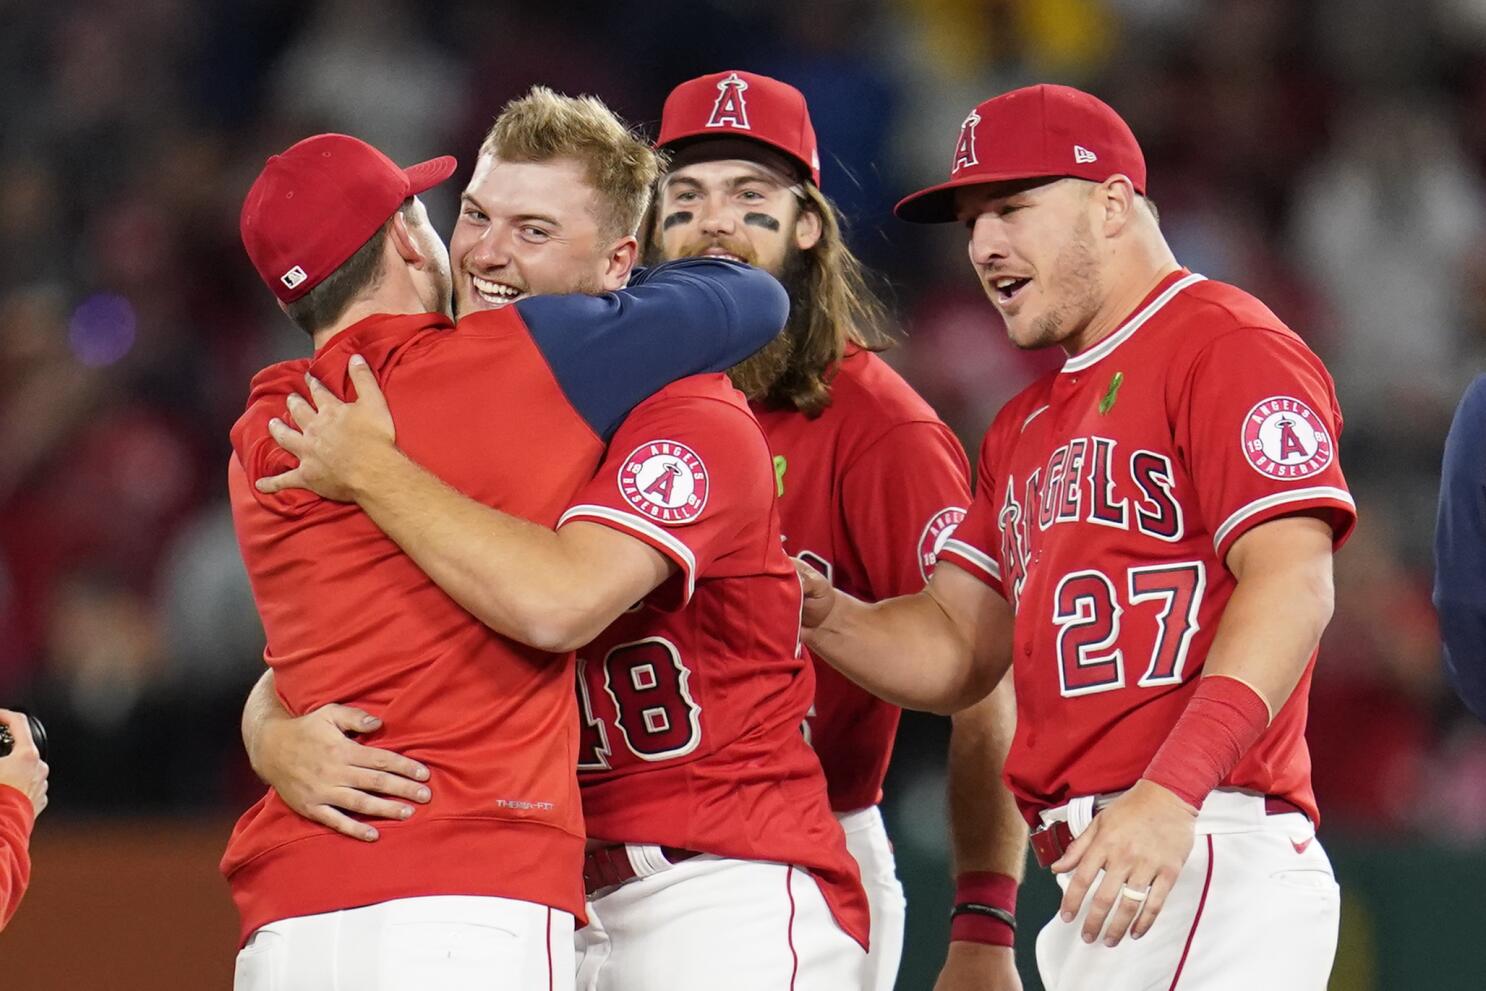 Angels' Reid Detmers snaps out of slump with no-hit bid, National Sports